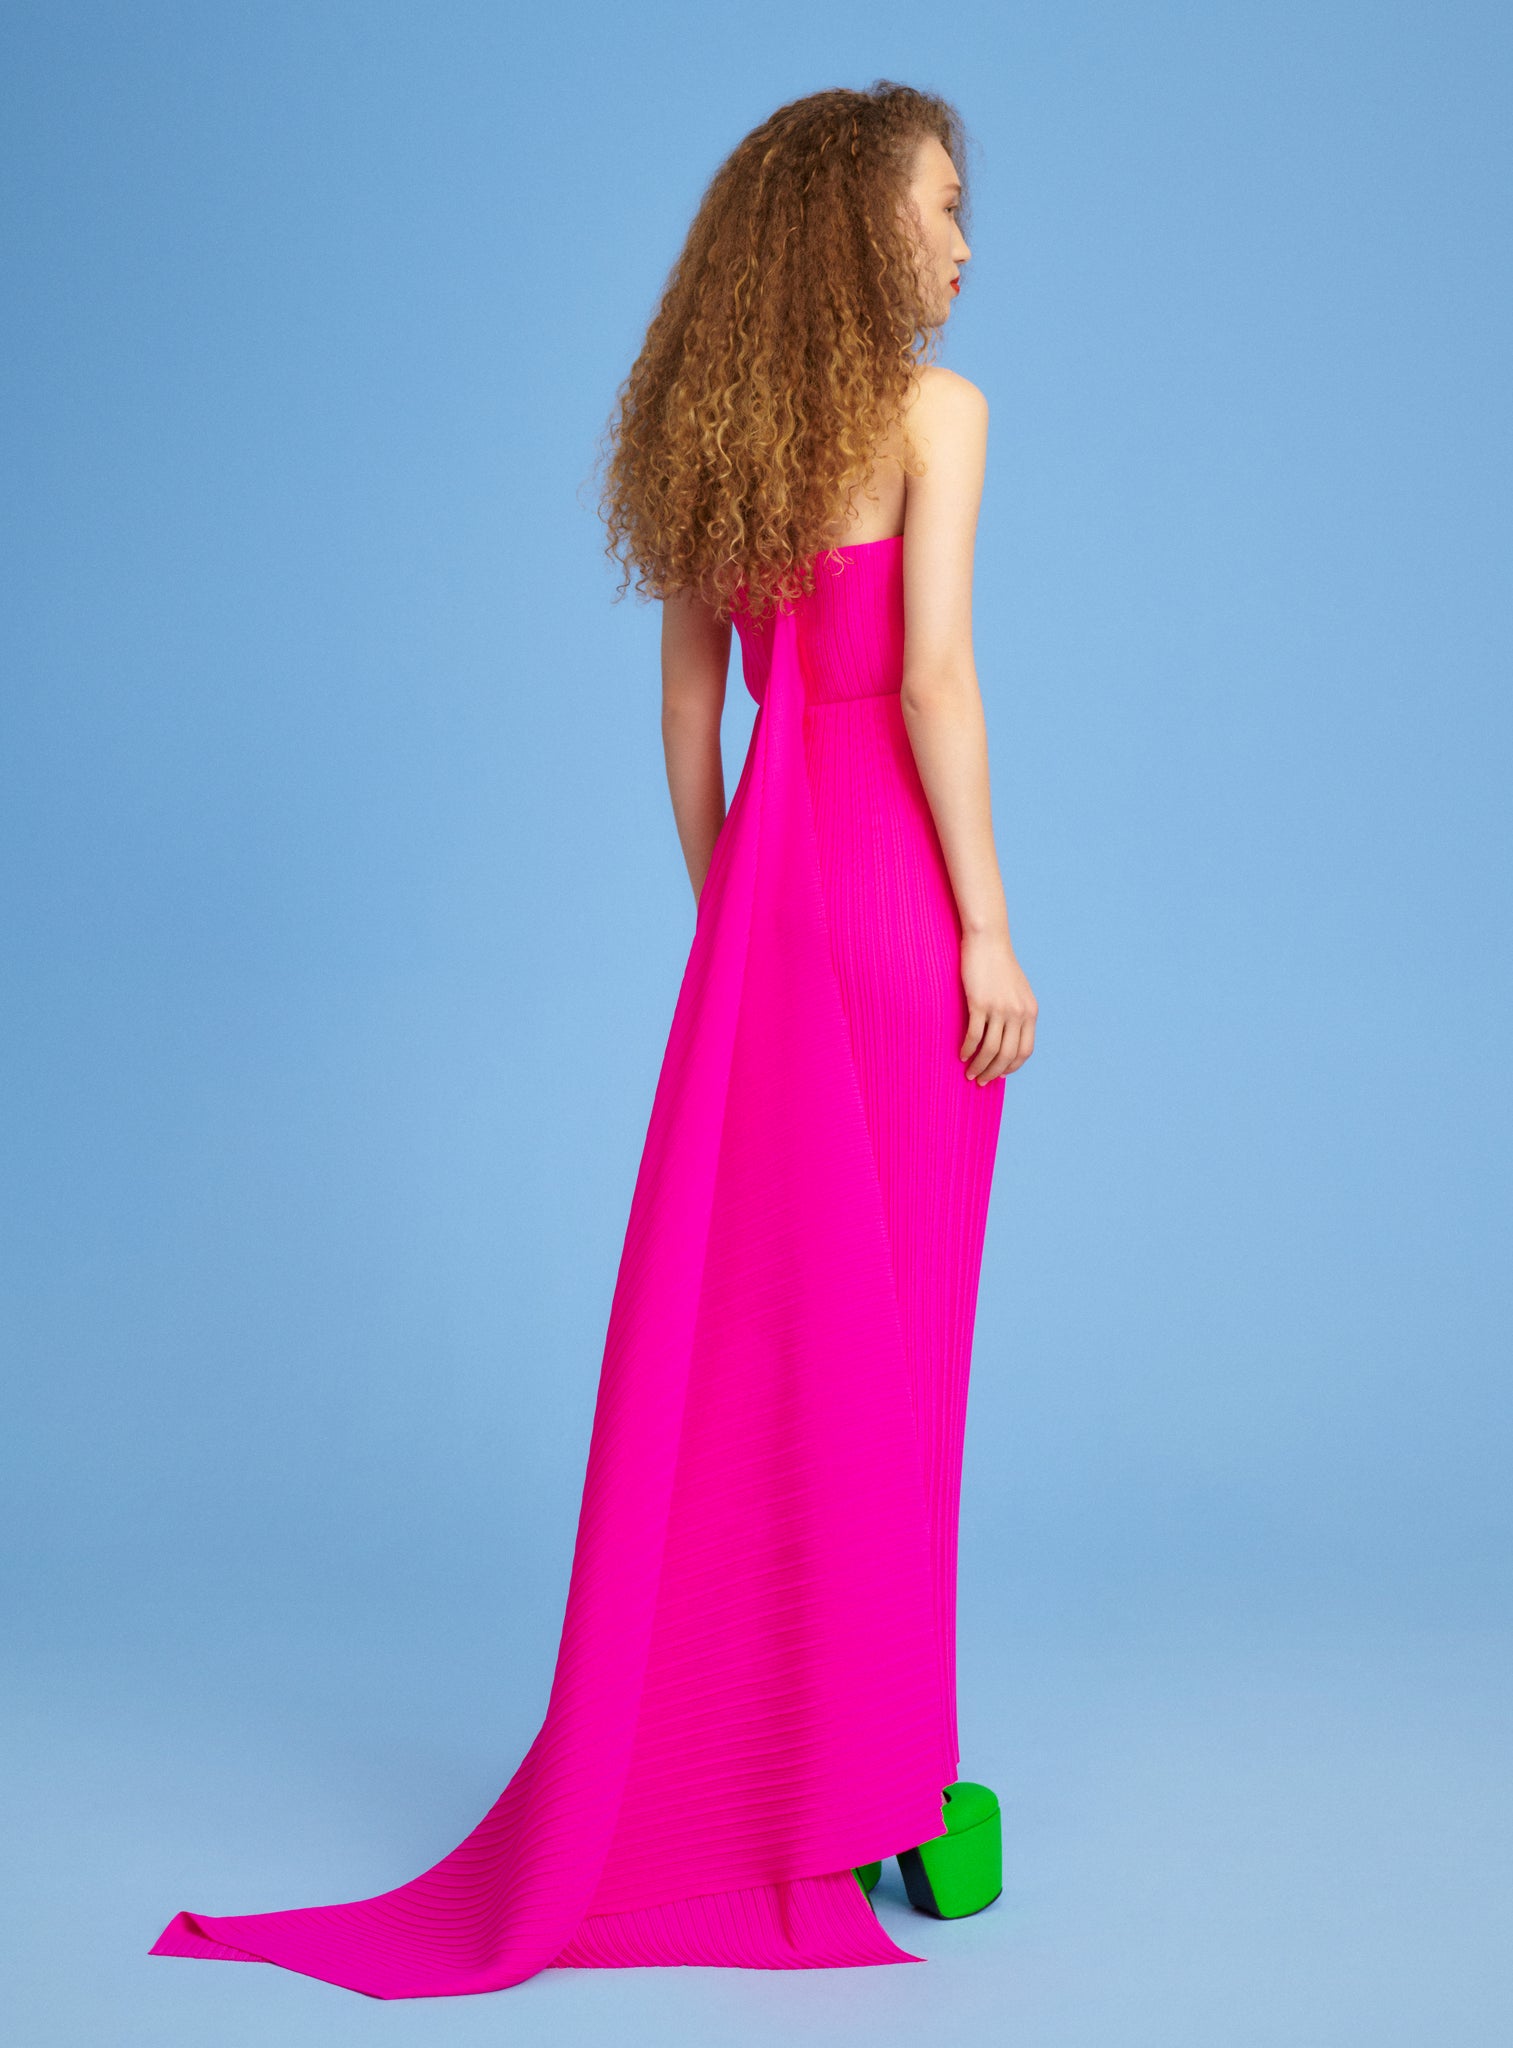 The Harlee Maxi Dress in Hot Pink